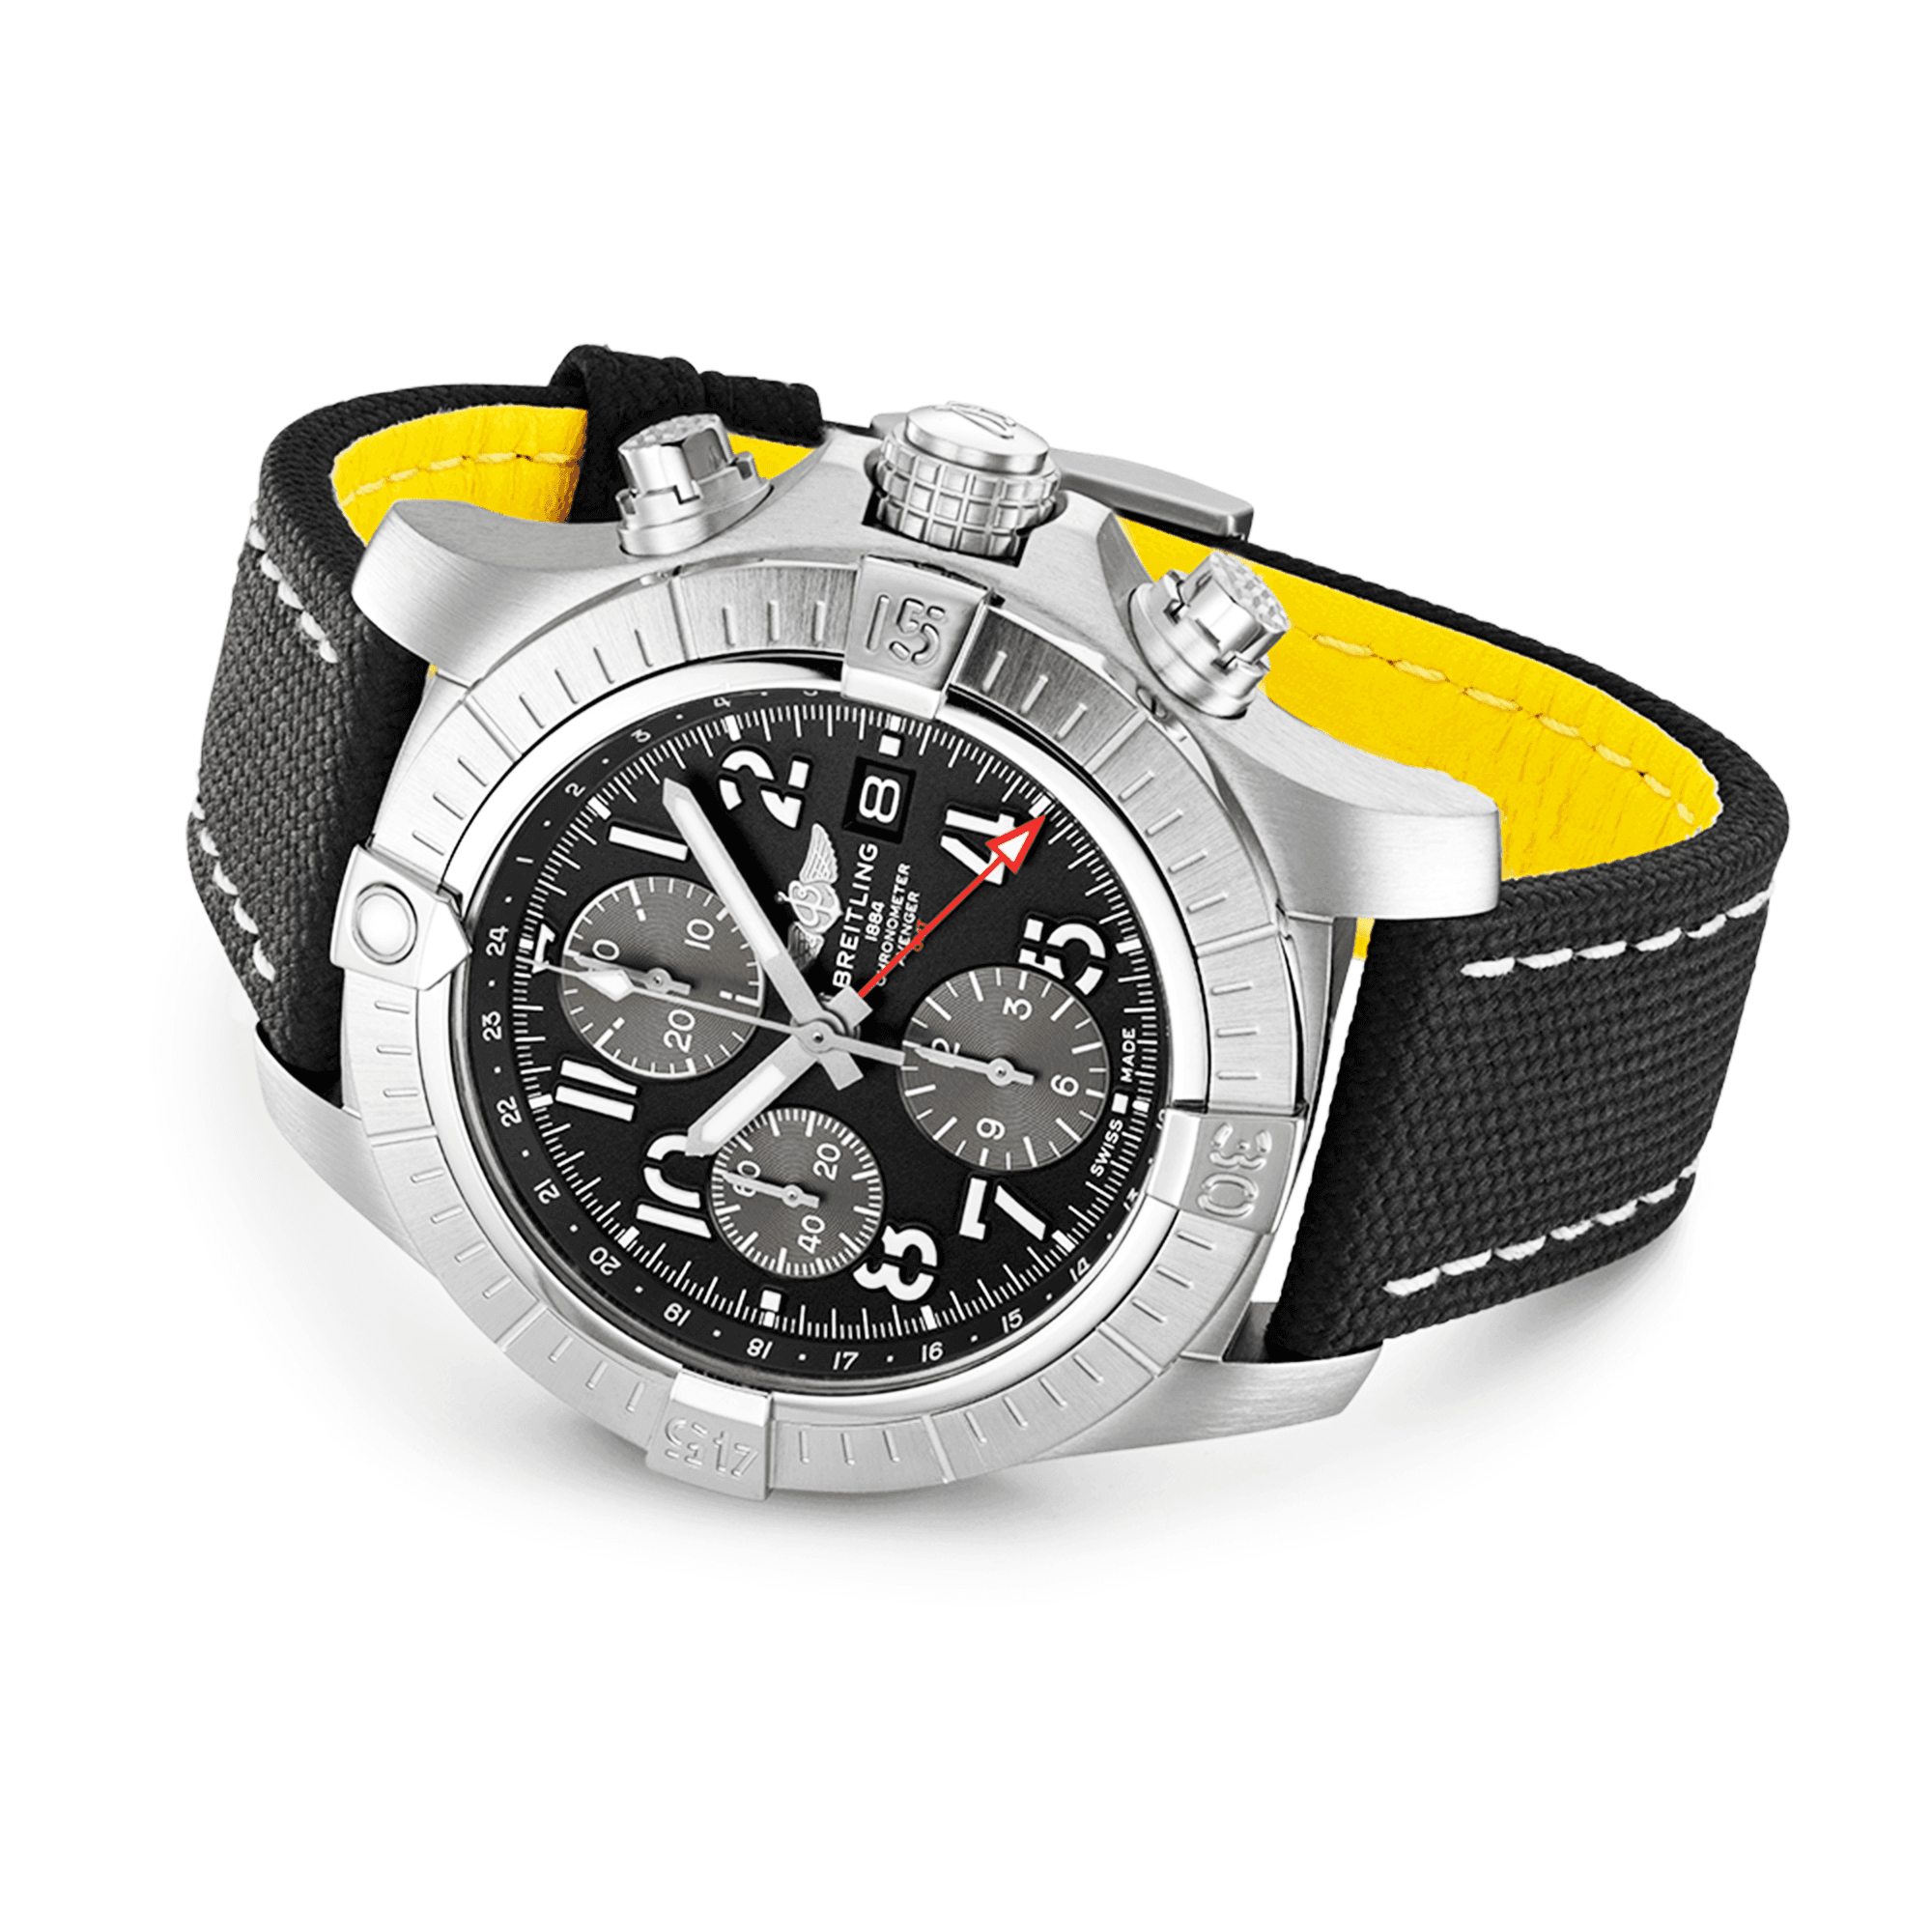 Avenger GMT 45mm Black/Grey Dial Automatic Chronograph Strap Watch